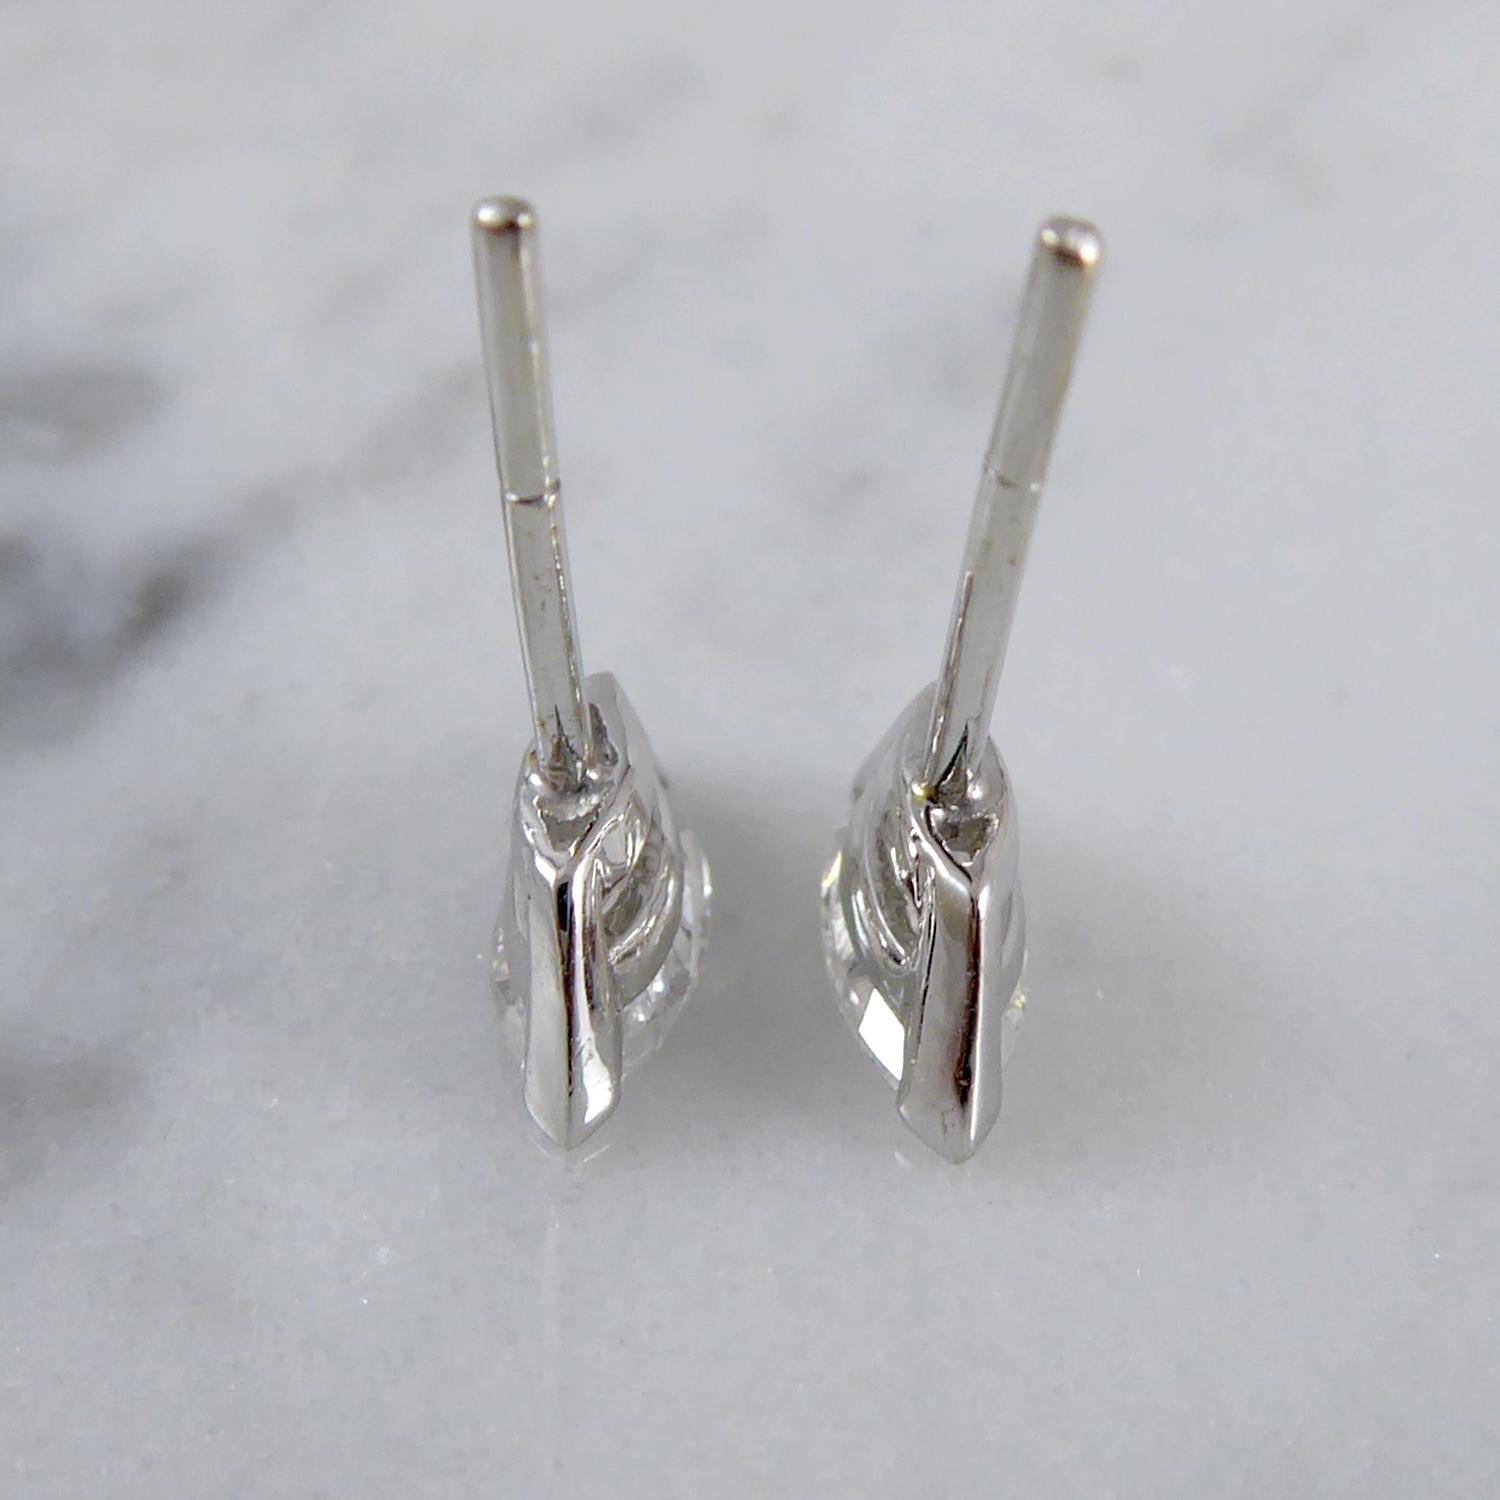 An unsual cut stone for earrings but these marquise diamonds are so flattering and sit delicately on the earlobe.  Each marquise cut stone is approx. 7.7mm long,  is assessed as E/F colour and VS2/SI1 clarity and, together, they weigh 0.75ct.  White